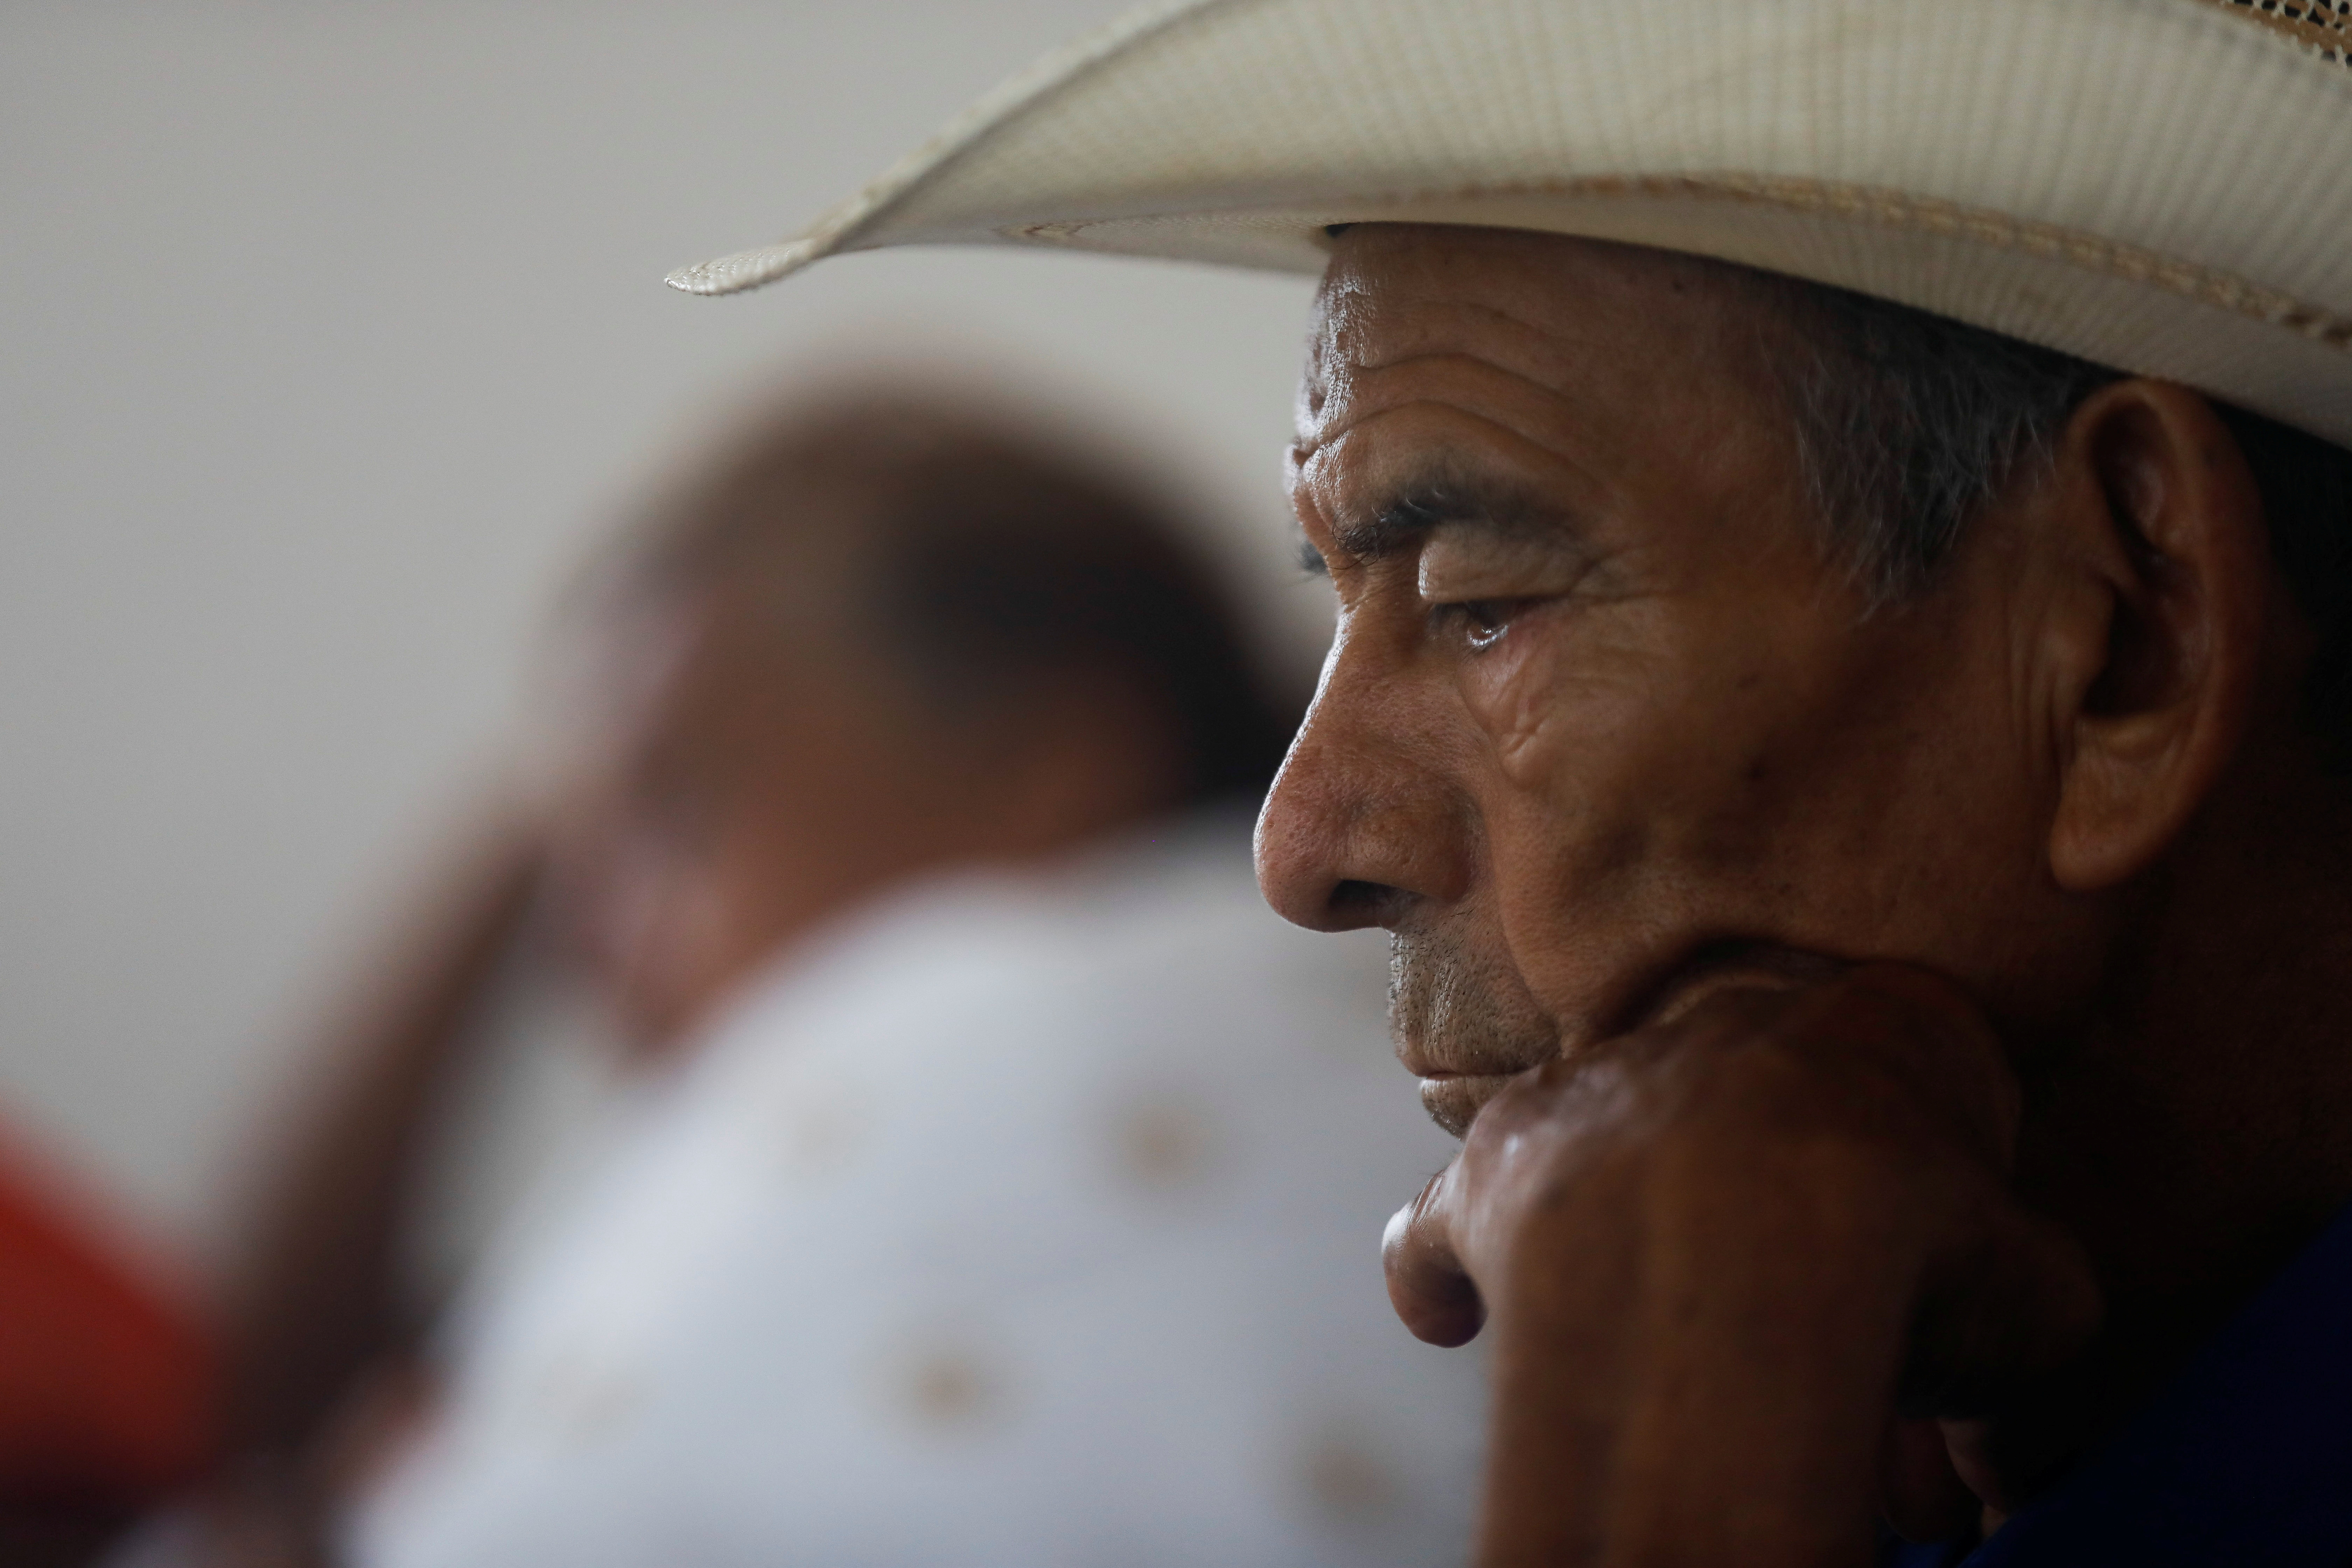 The relatives of the miners plead for the lives of their loved ones (Photo: Reuters / Daniel Becerril)